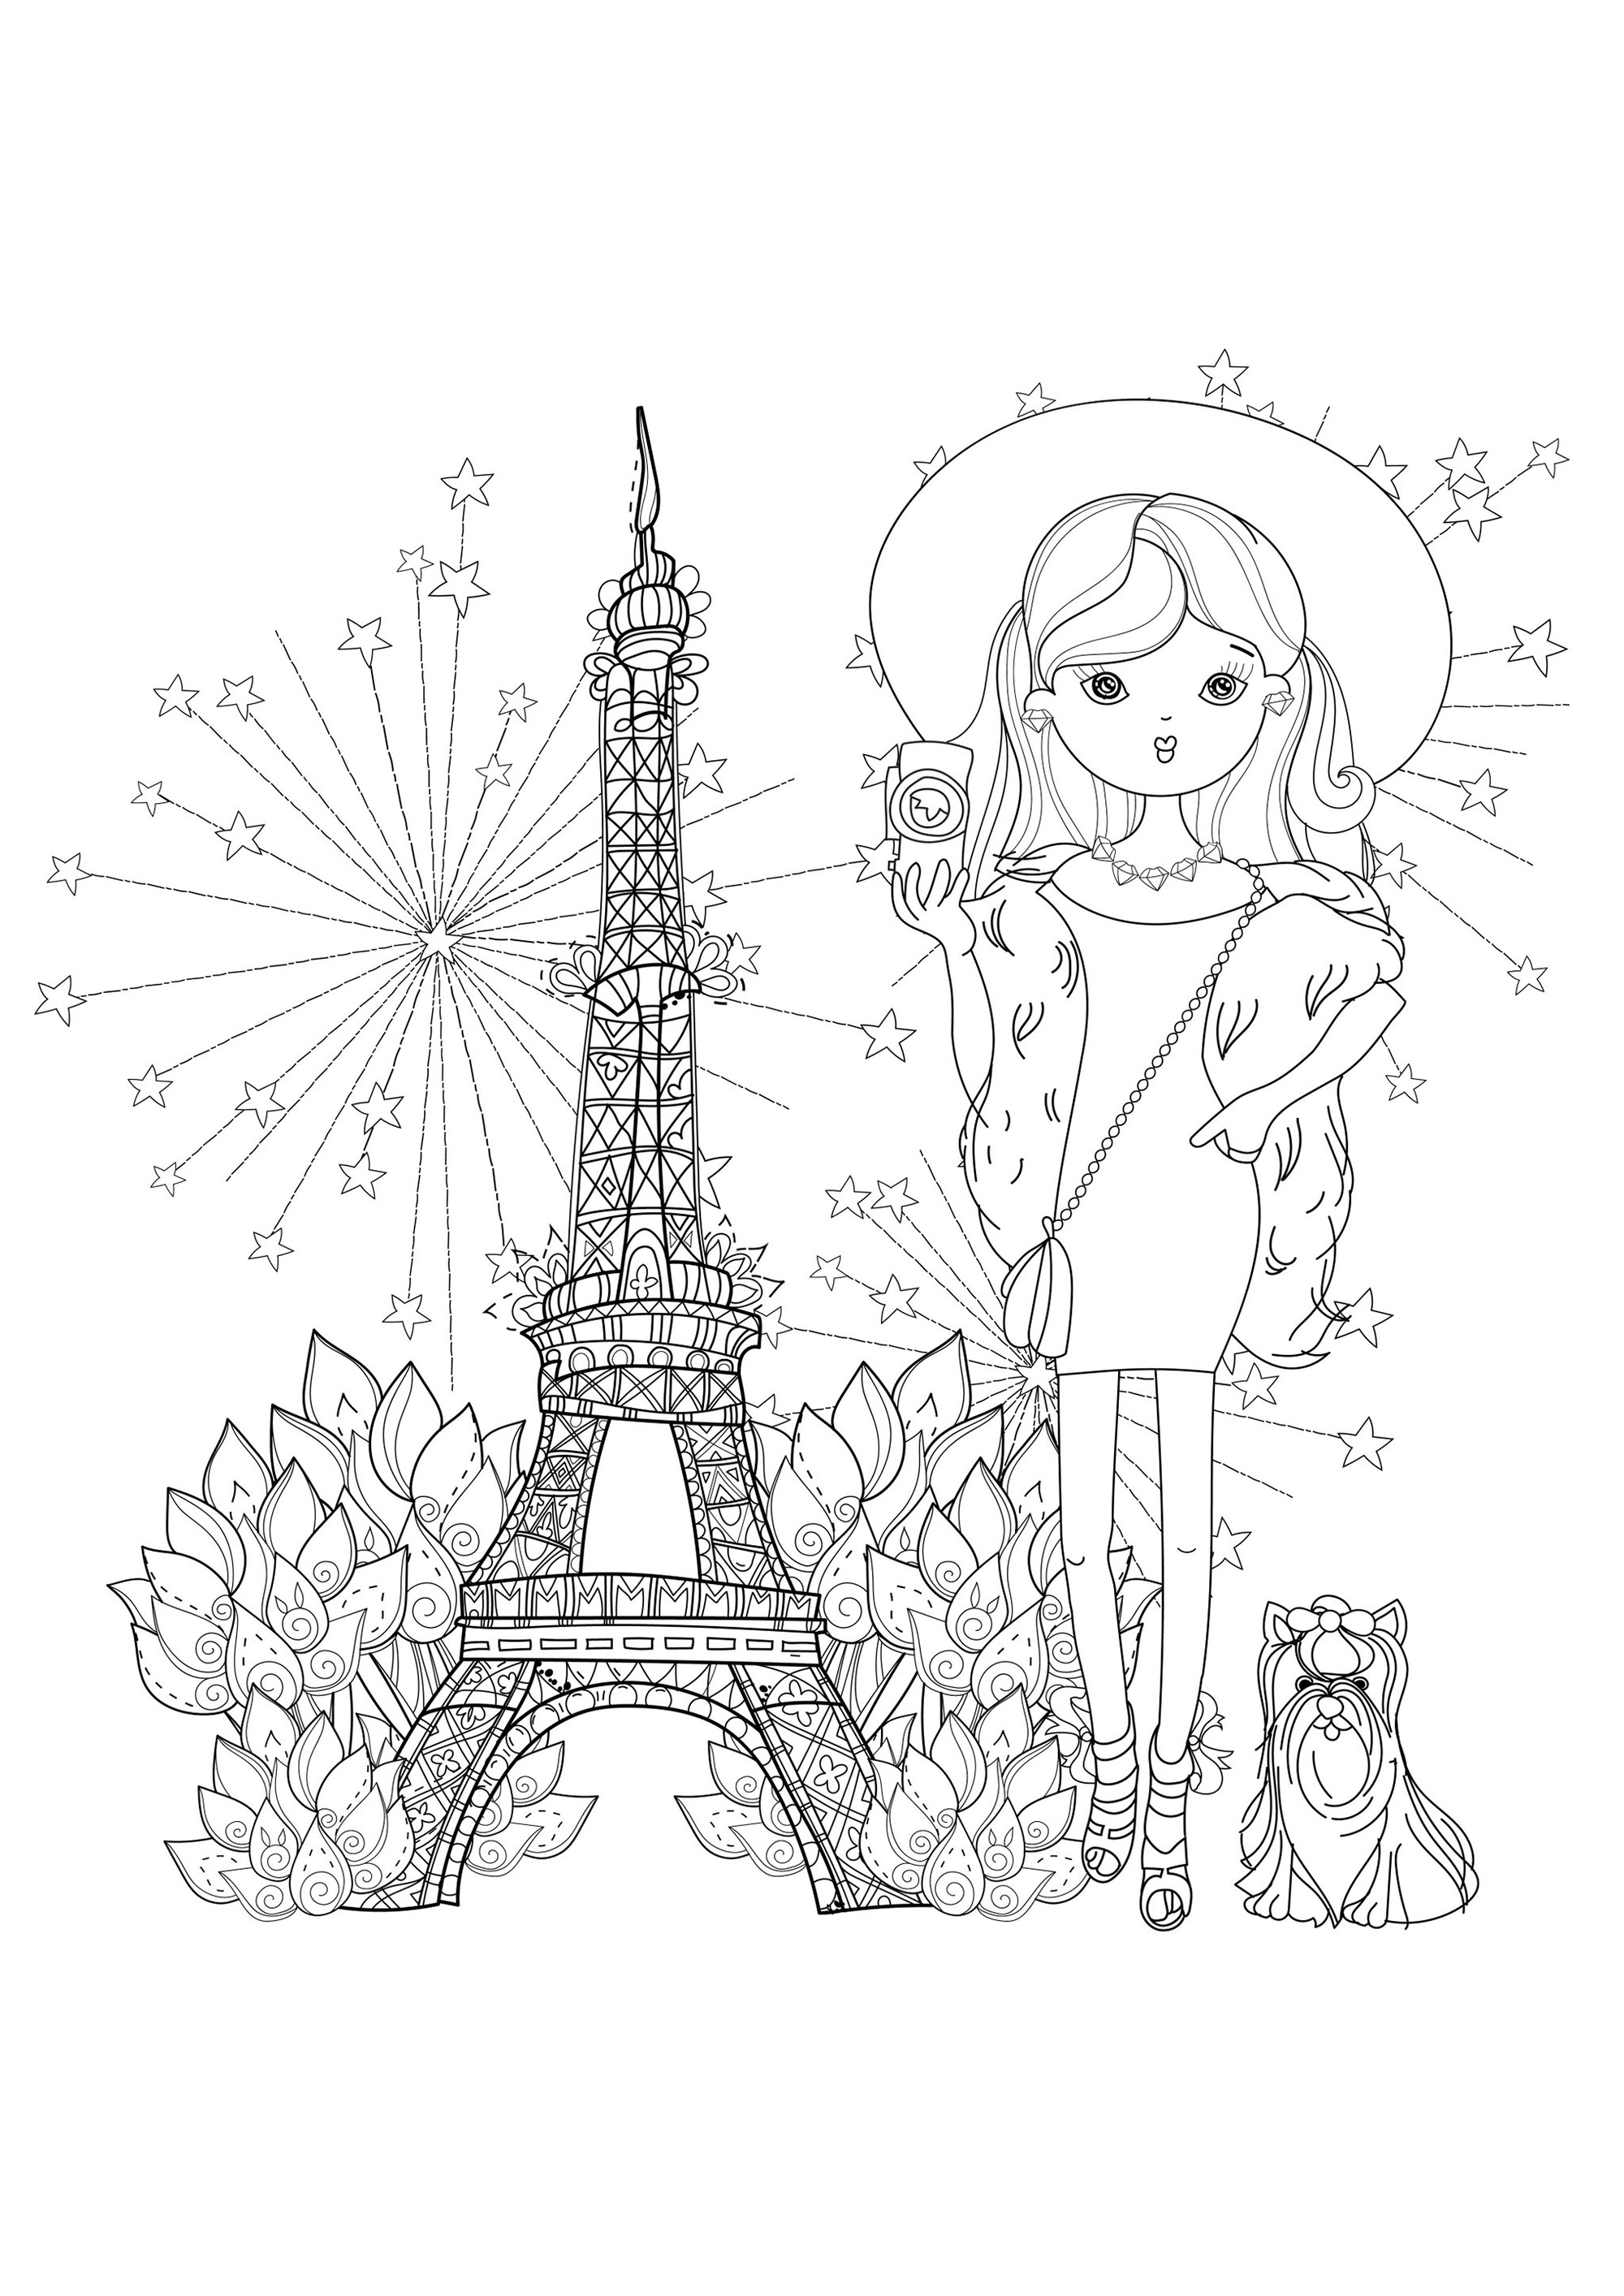 Young traveler with her little dog, and Eiffel Tower. Built in 1889 for the Exposition Universelle, the Eiffel Tower (Tour Eiffel) has become the main symbol of Paris, and even of France, Source : 123rf   Artist : Yazzik